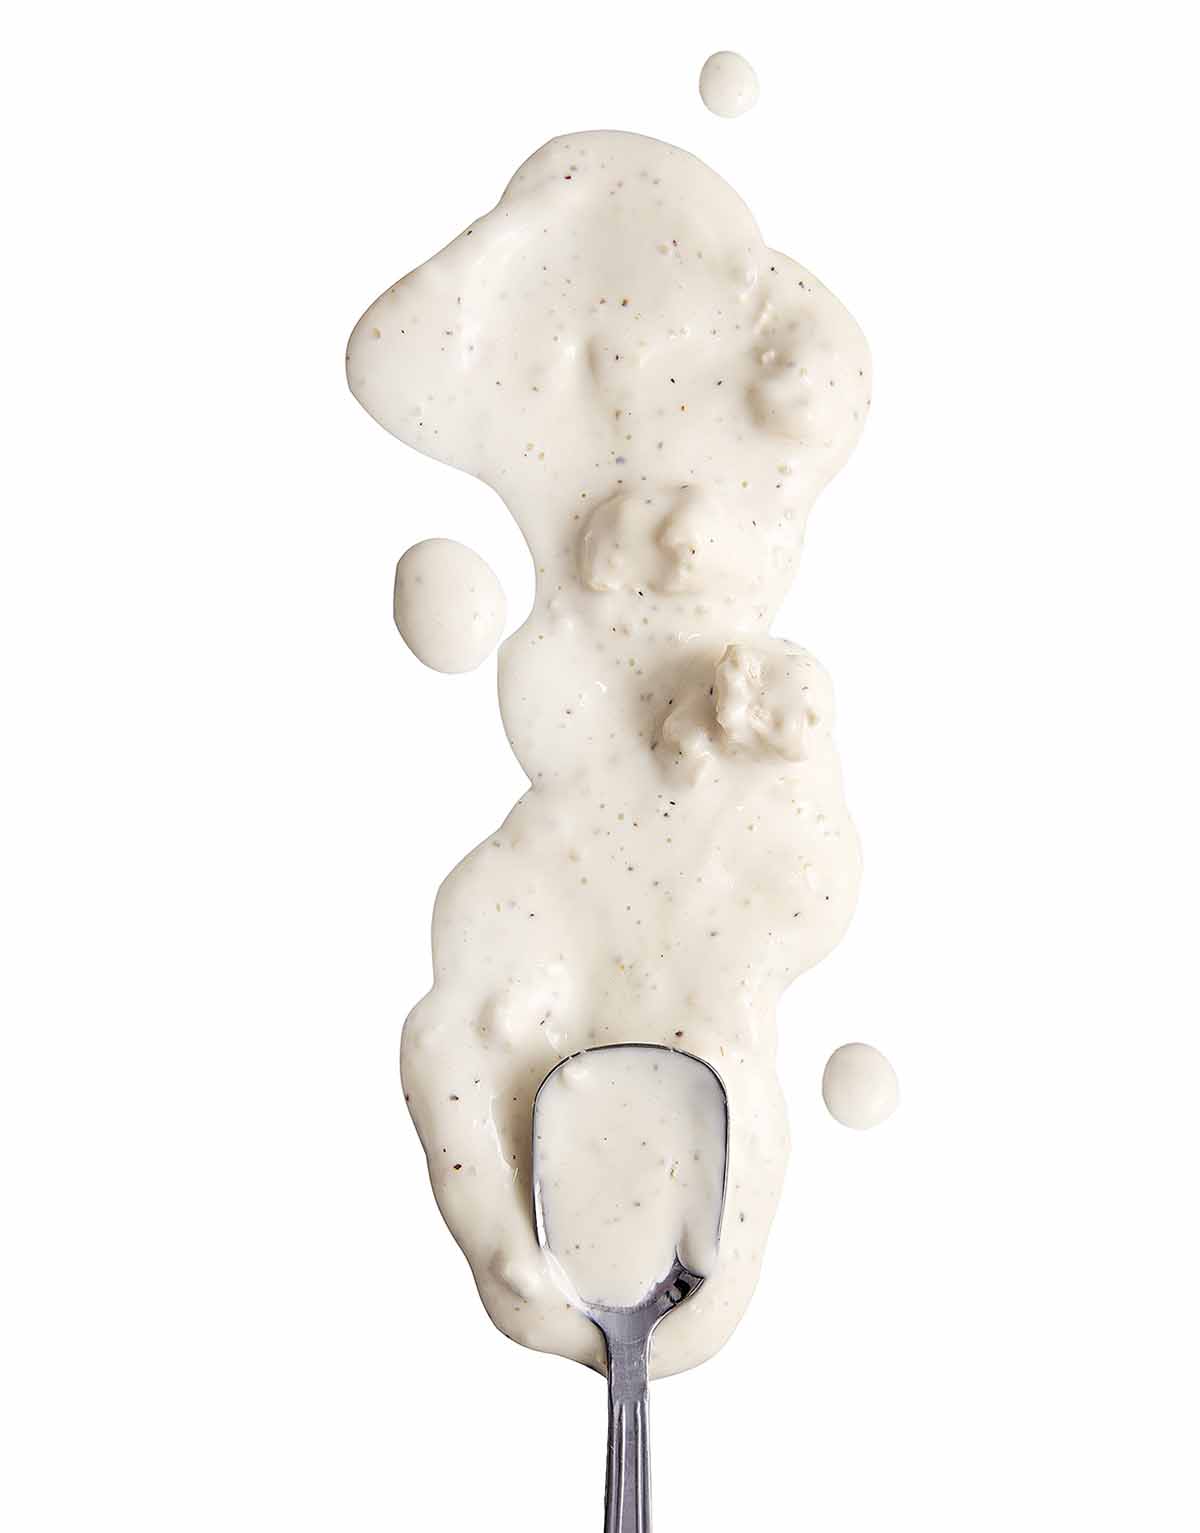 Blue cheese dip, with chunks of blue cheese, spilled in a white background with a spoon.